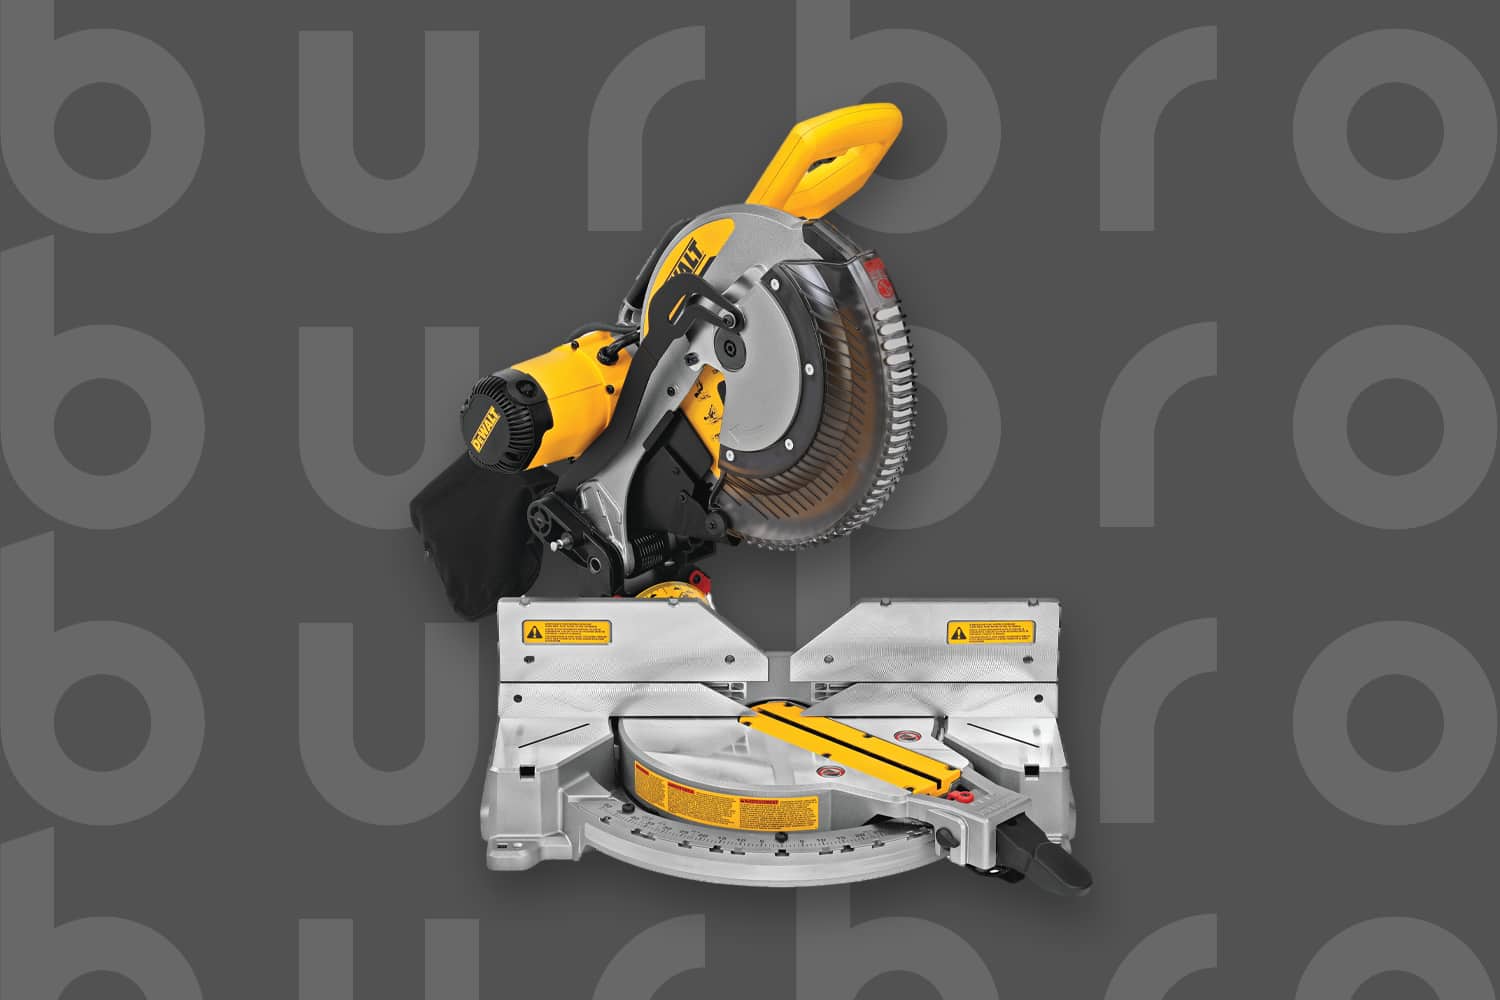 This is the cover photo for our Best Miter Saw article. It features a yellow and black Dewalt miter saw overlaid on a dark grey background with embossed Burbro logo.